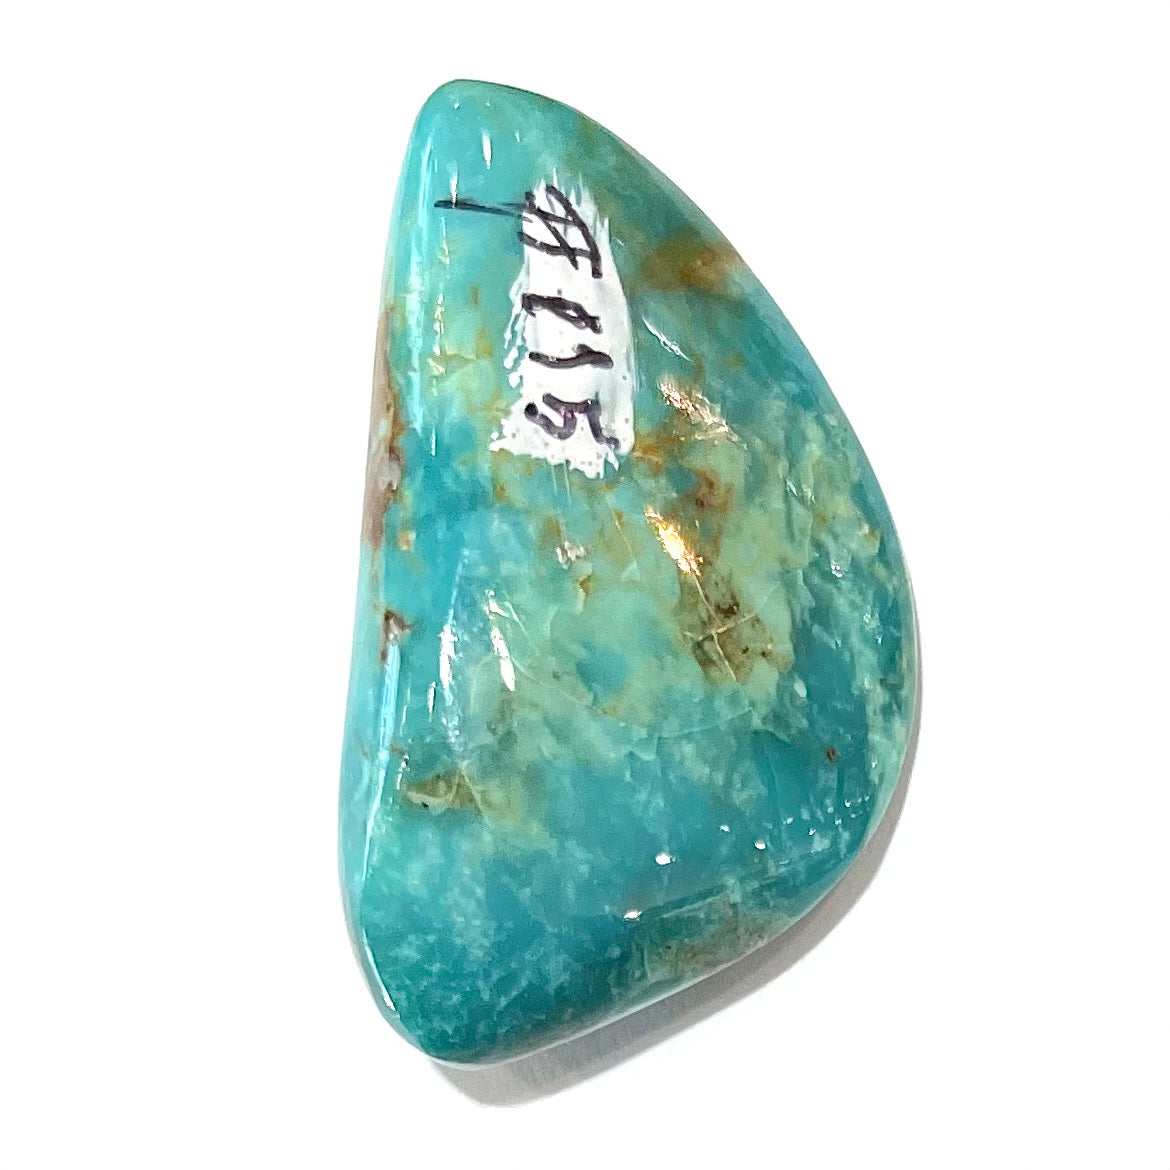 A loose freeform cut turquoise stone from the Royston Mining District in Nevada.